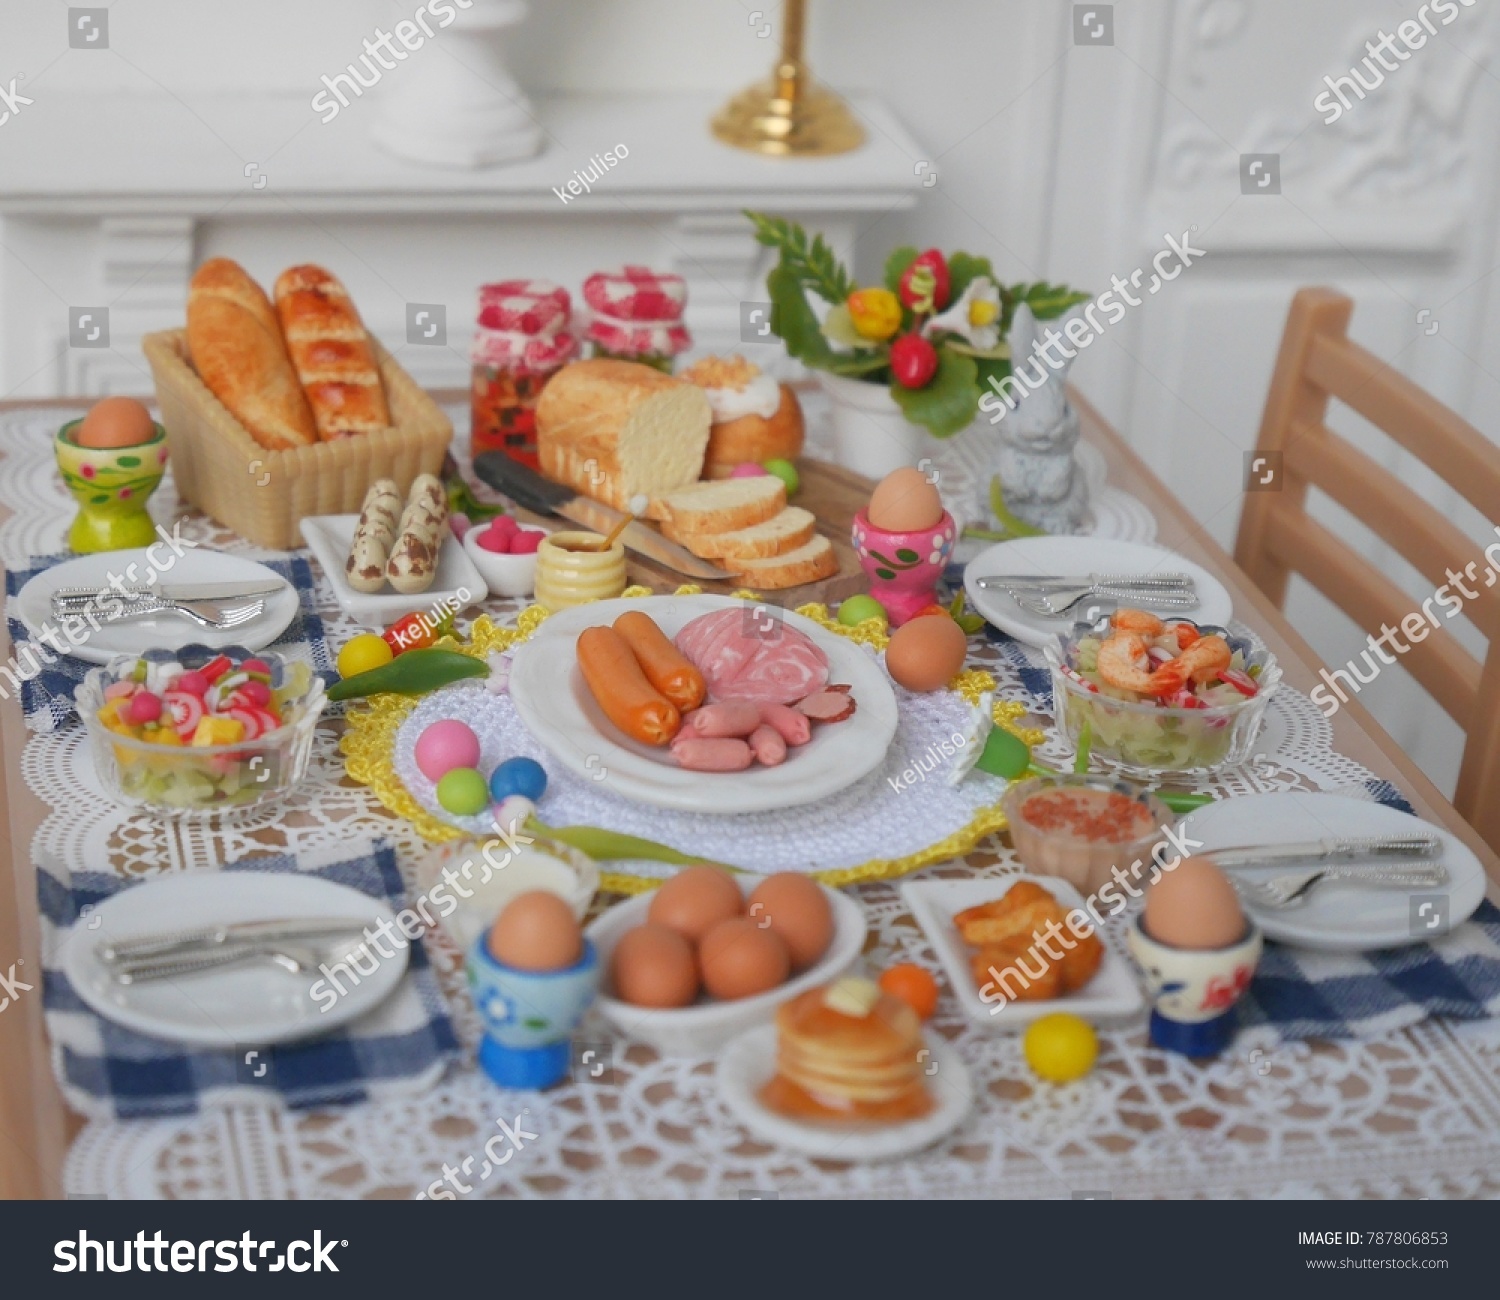 Breakfast Brunch Table Setting Easter Meal Stock Photo Edit Now 787806853